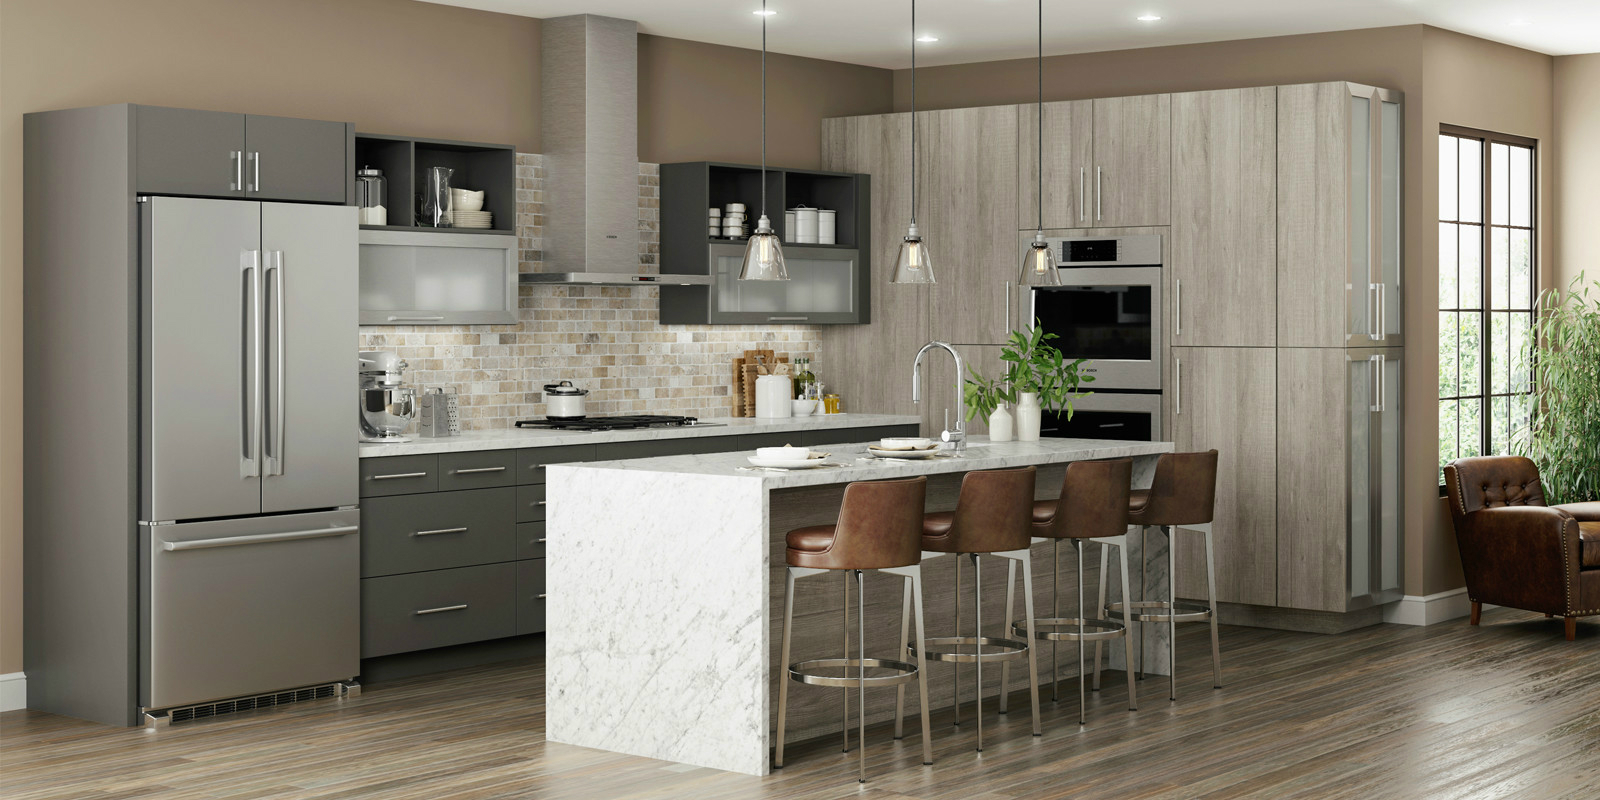 Latitude Cabinets At Lowe S Modern Frameless Kitchen And Bath Cabinets